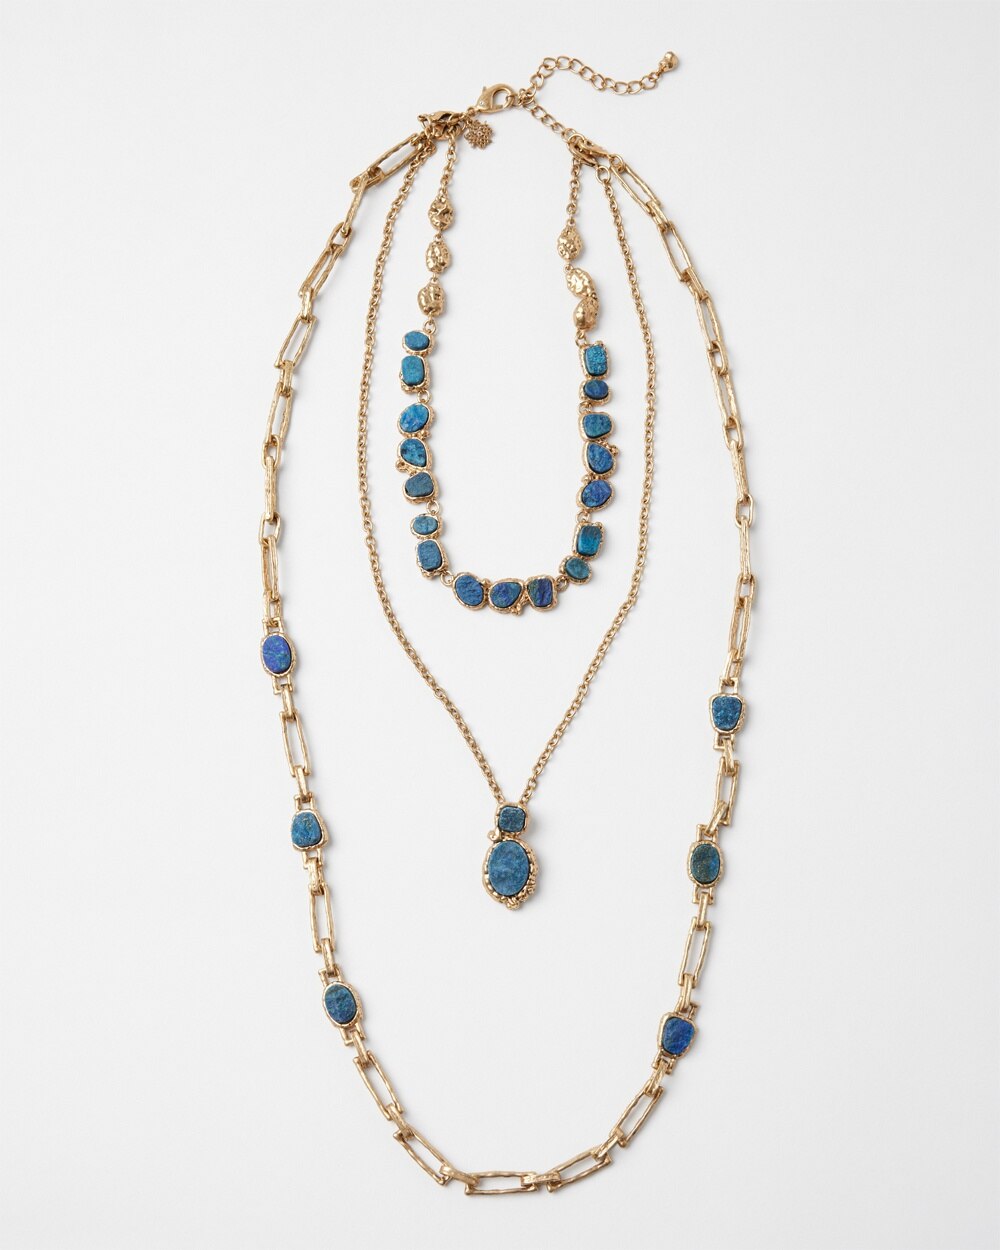 Goldtone and Blue Convertible Necklace